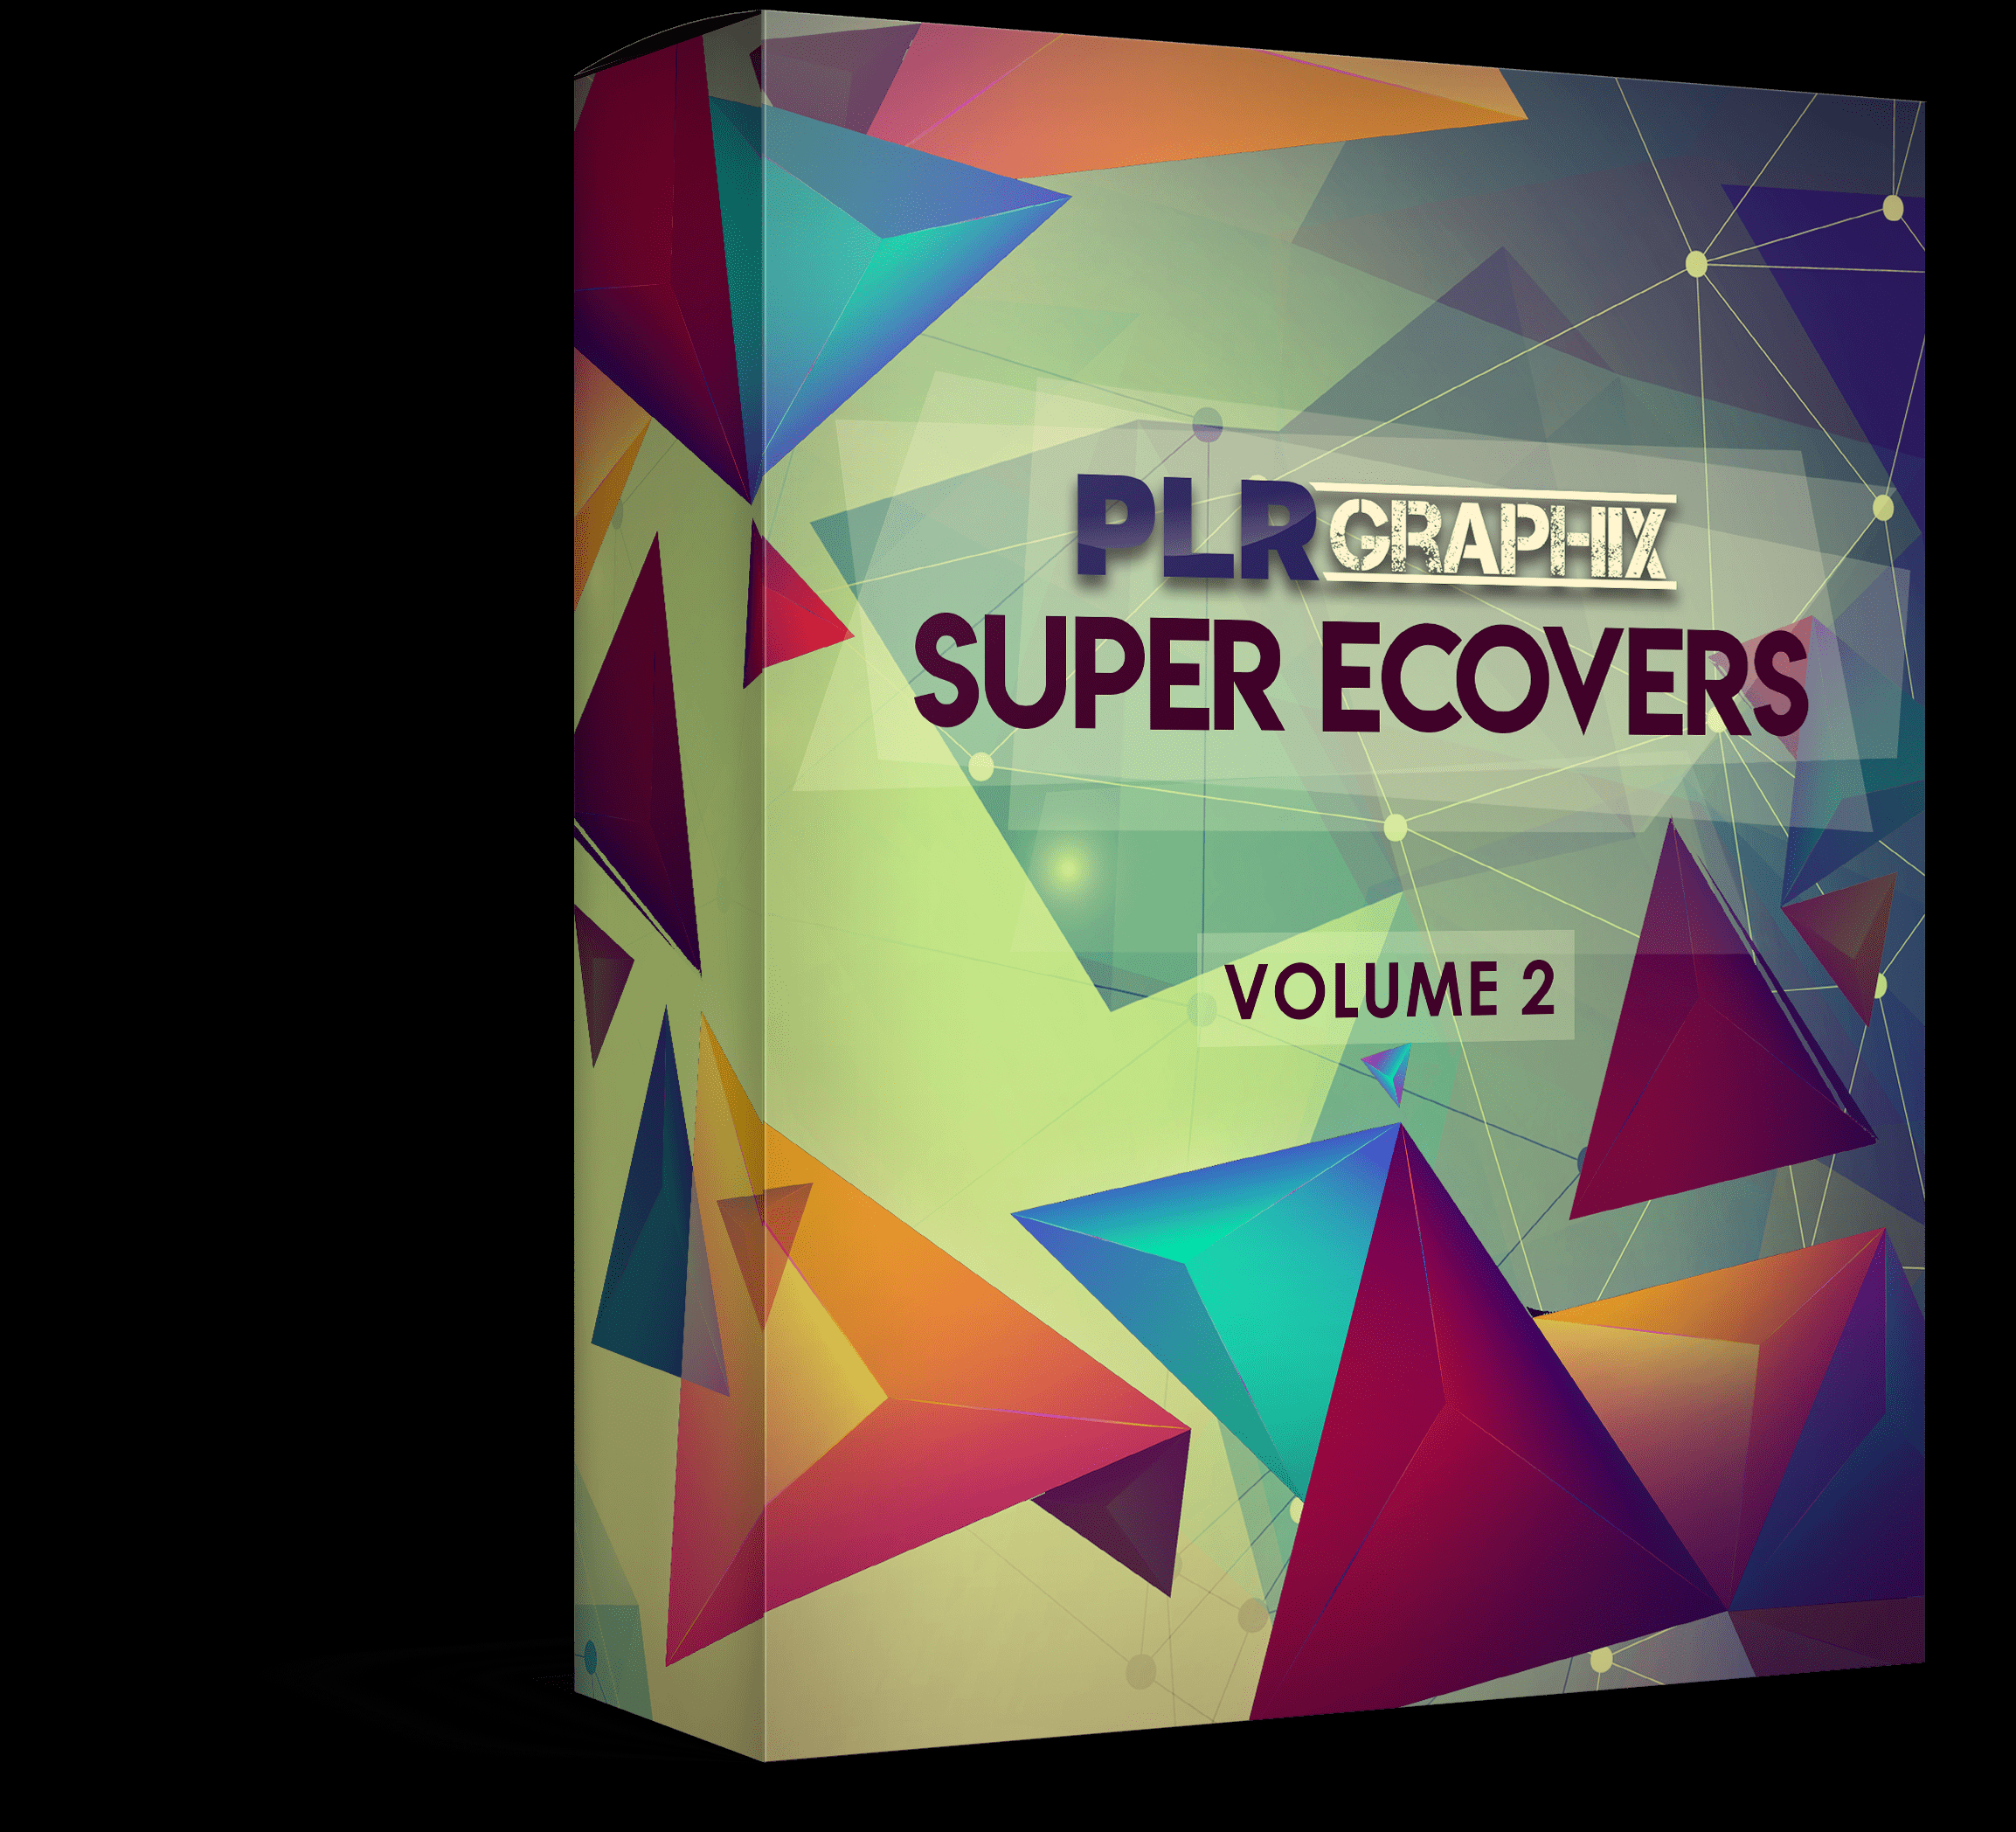 Super Ecovers Vol. 2 Review